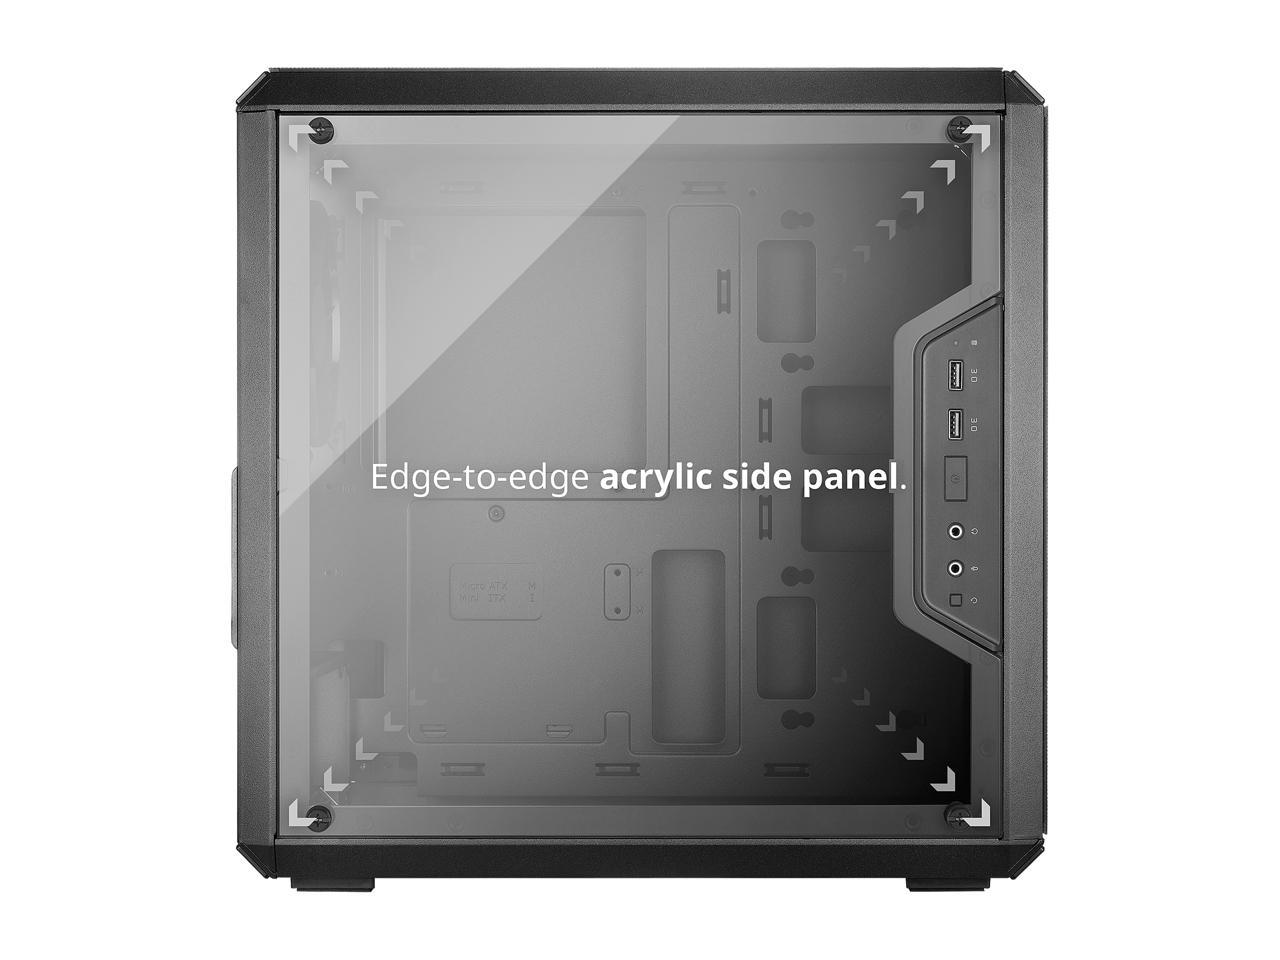 Cooler Master MasterBox Q300L Micro ATX Tower w/ Magnetic Design Dust Filter, Transparent Acrylic Side Panel, Adjustable I/O & Fully Ventilated for Airflow, MCB-Q300L-KANN-S00